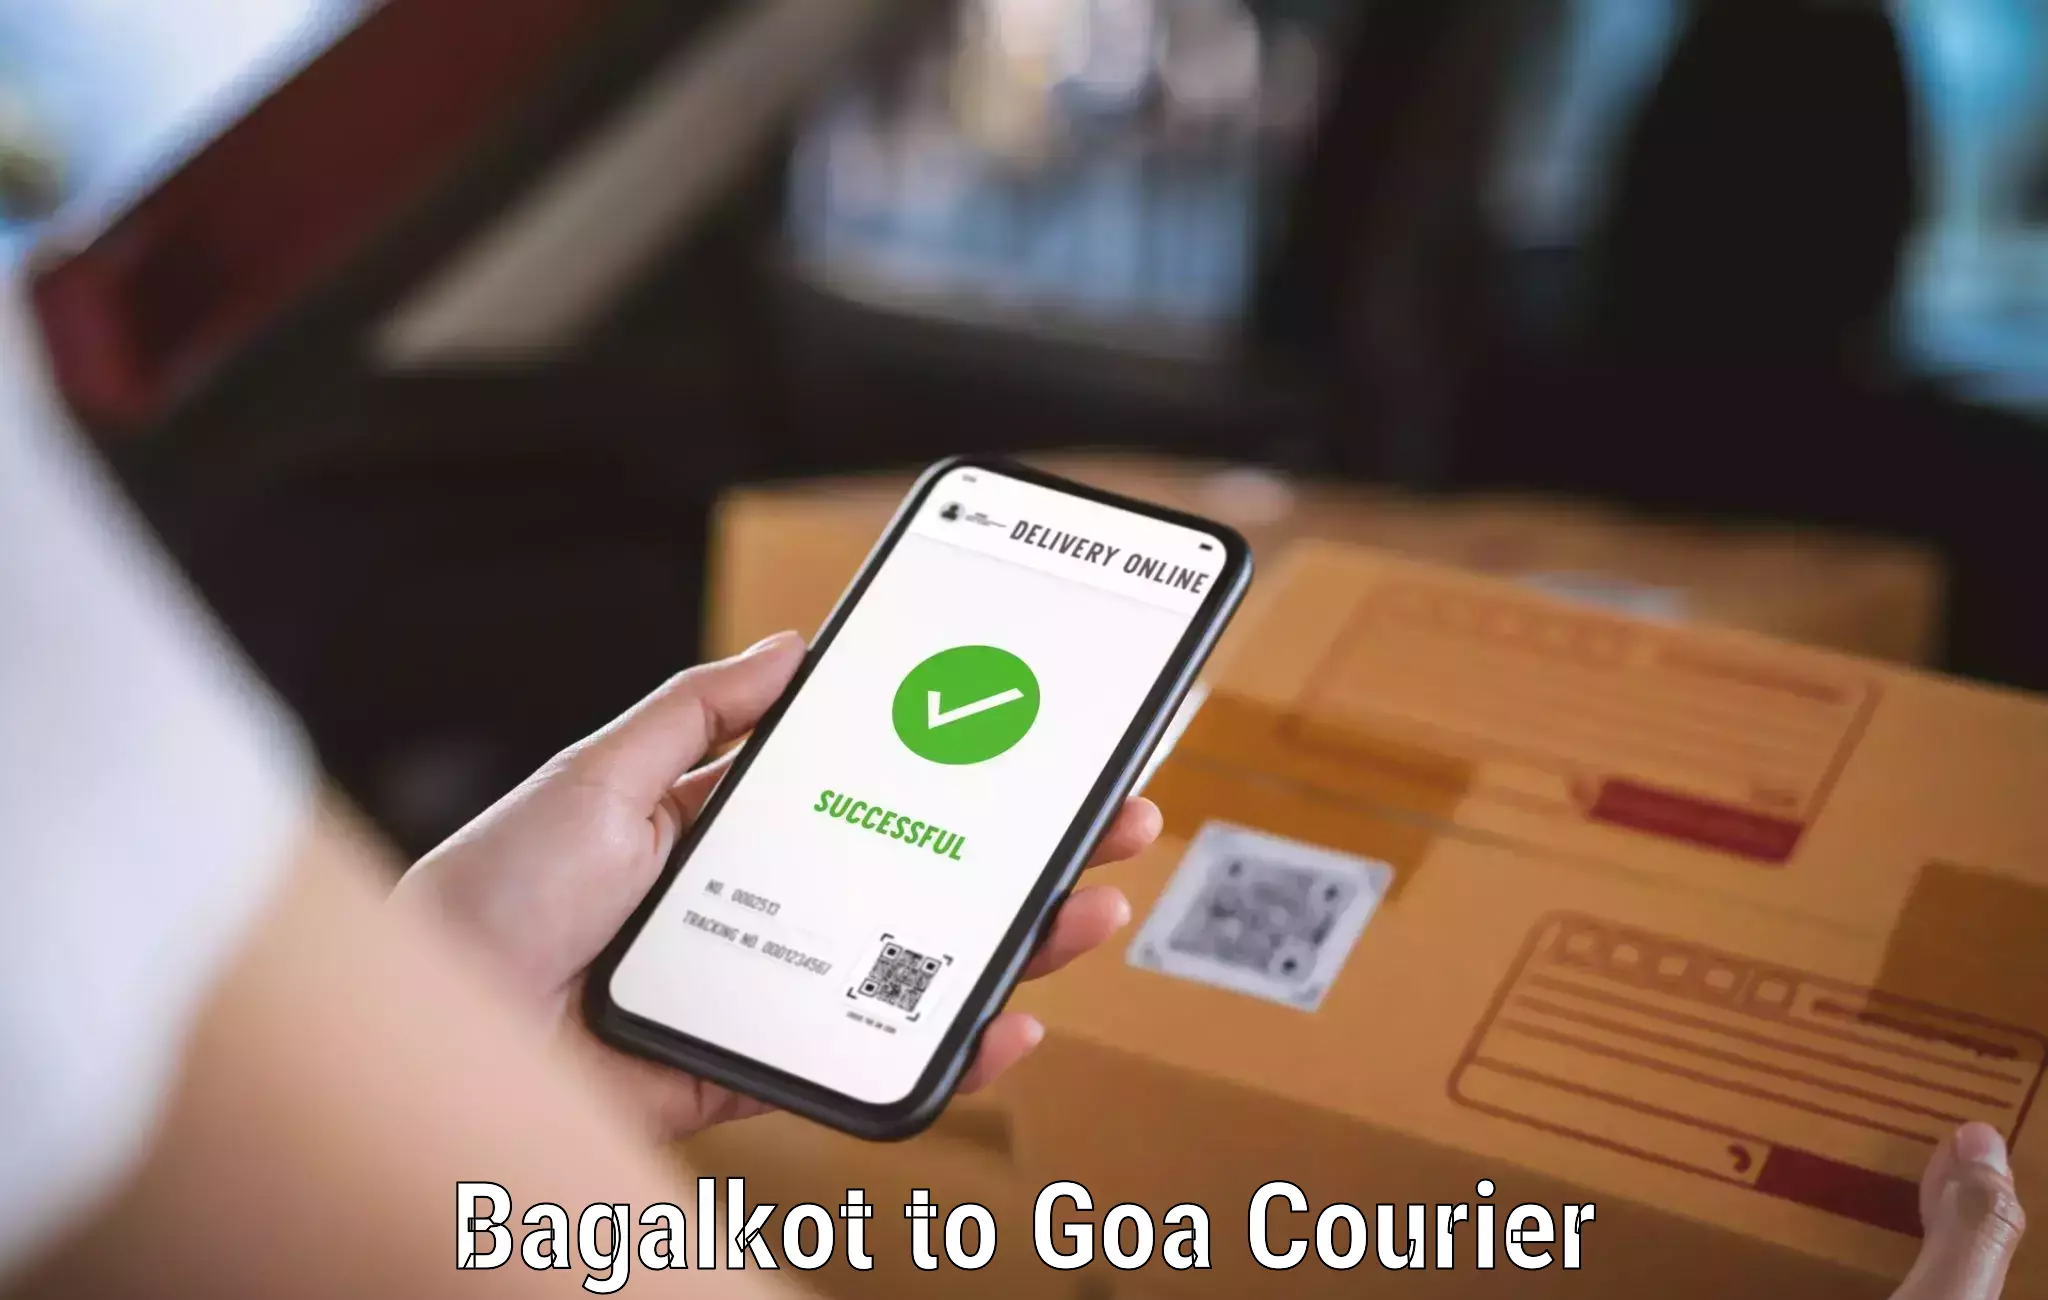 Doorstep delivery service Bagalkot to Goa